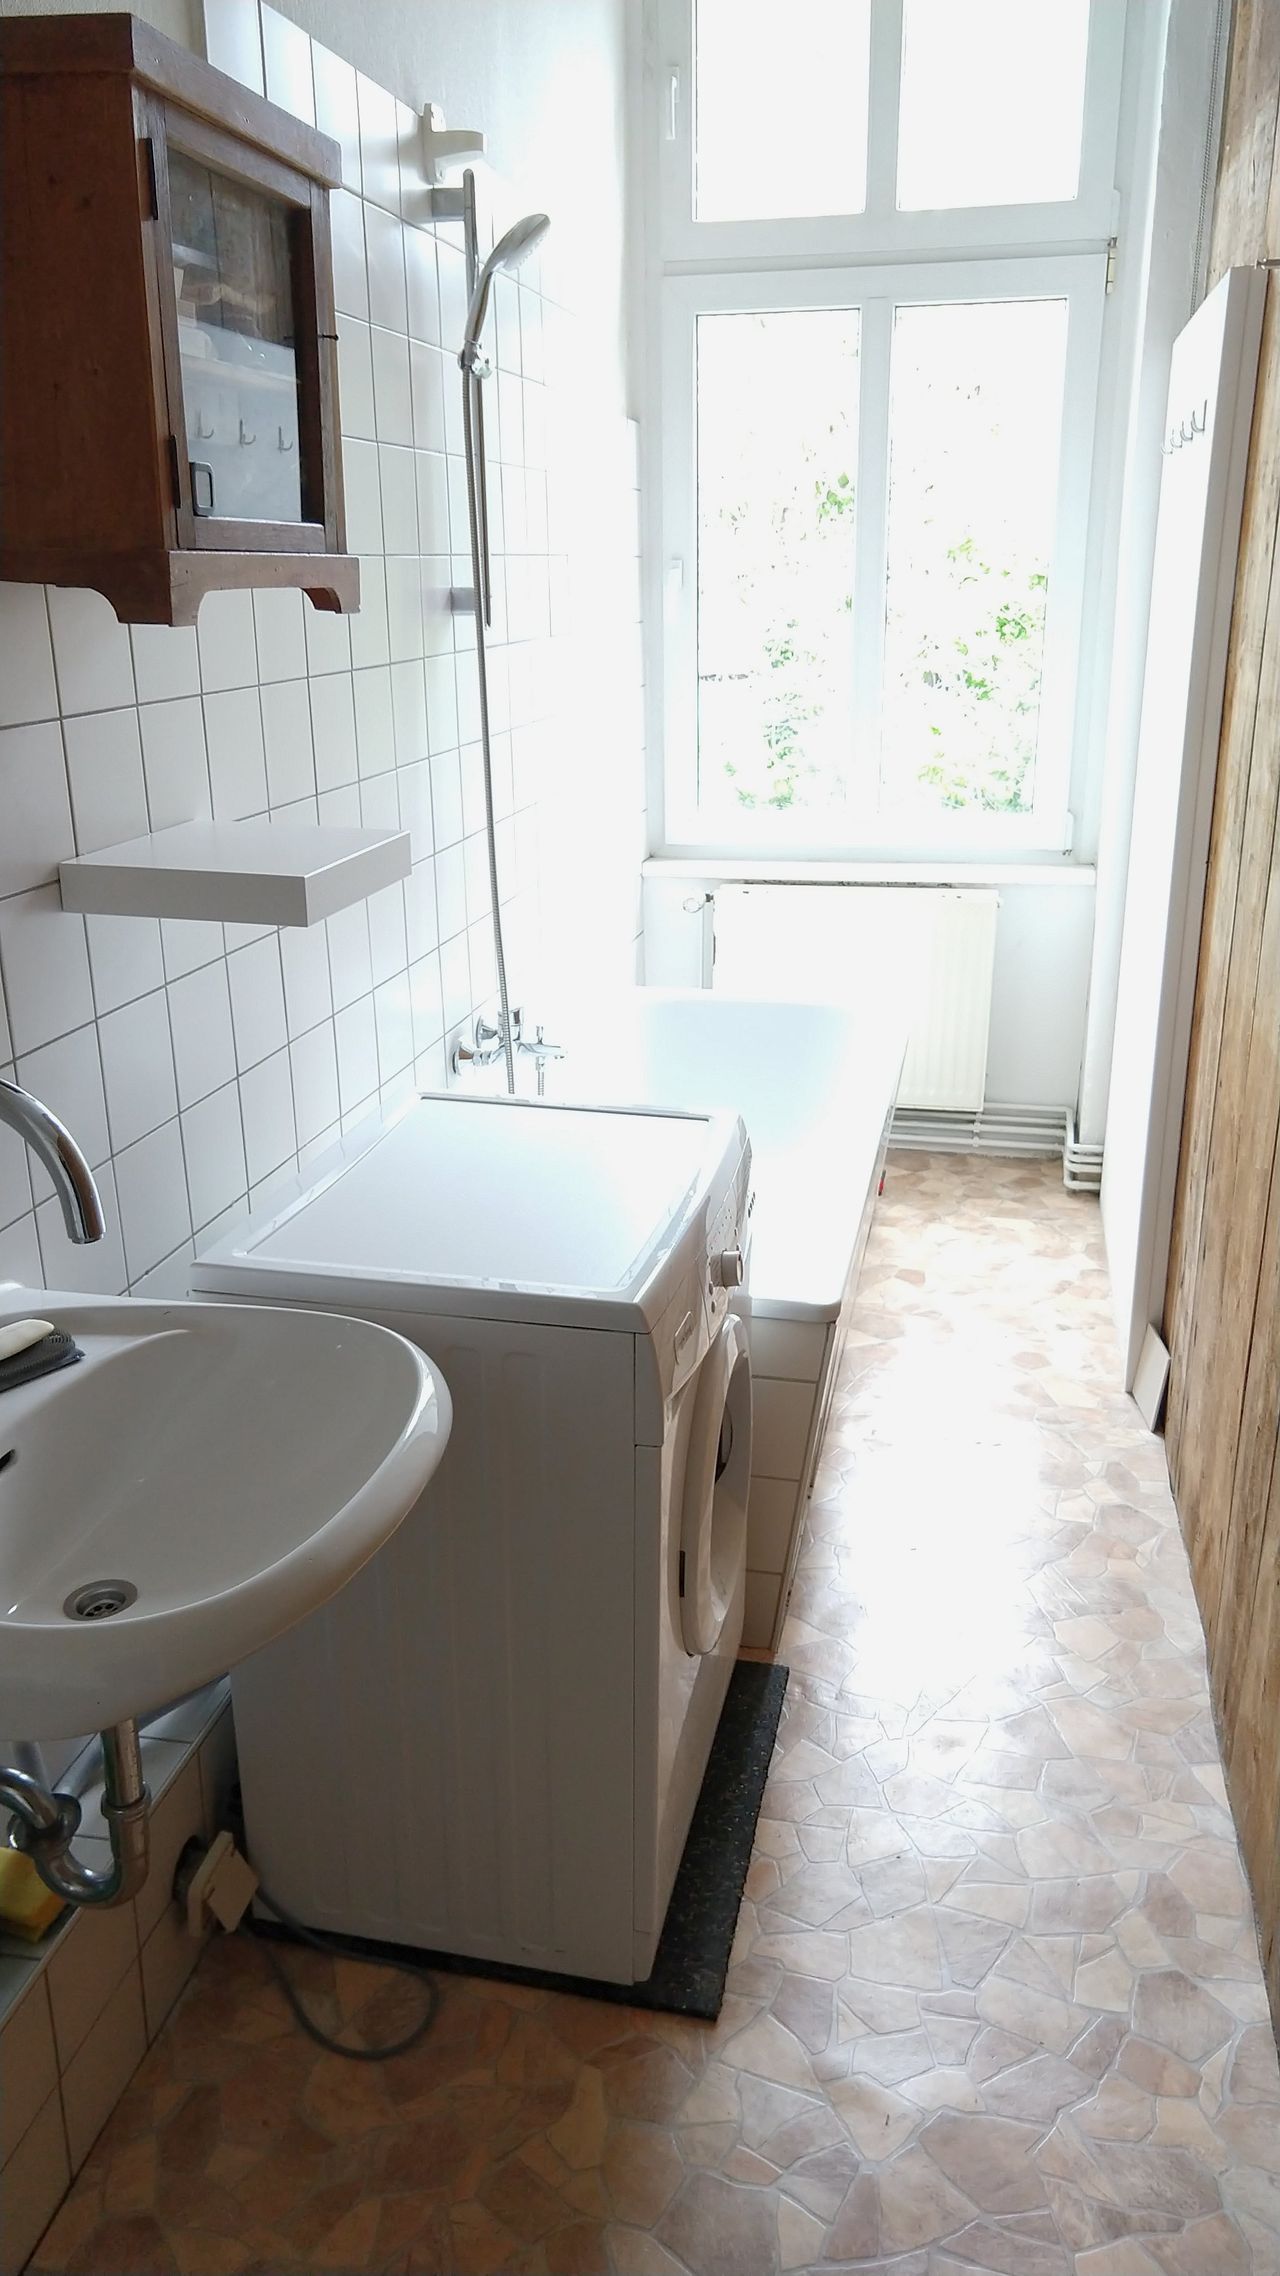 Cozy apartment with living room, balcony, bedroom, bathroom, kitchen in an old building in Pankow, Berlin